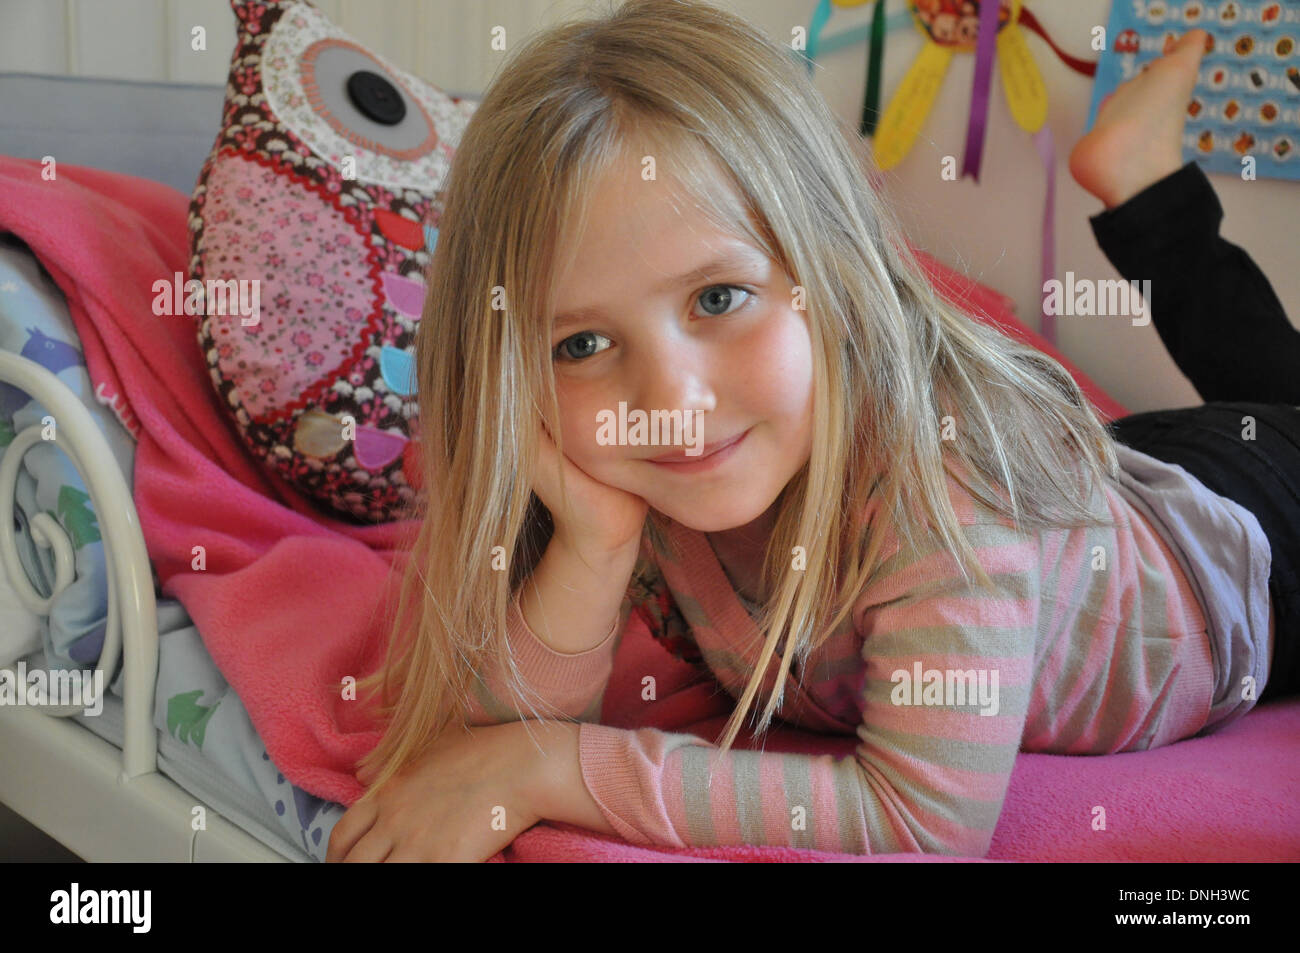 portrait of pretty blonde smiling girl aged 6 to 10 years Stock Photo